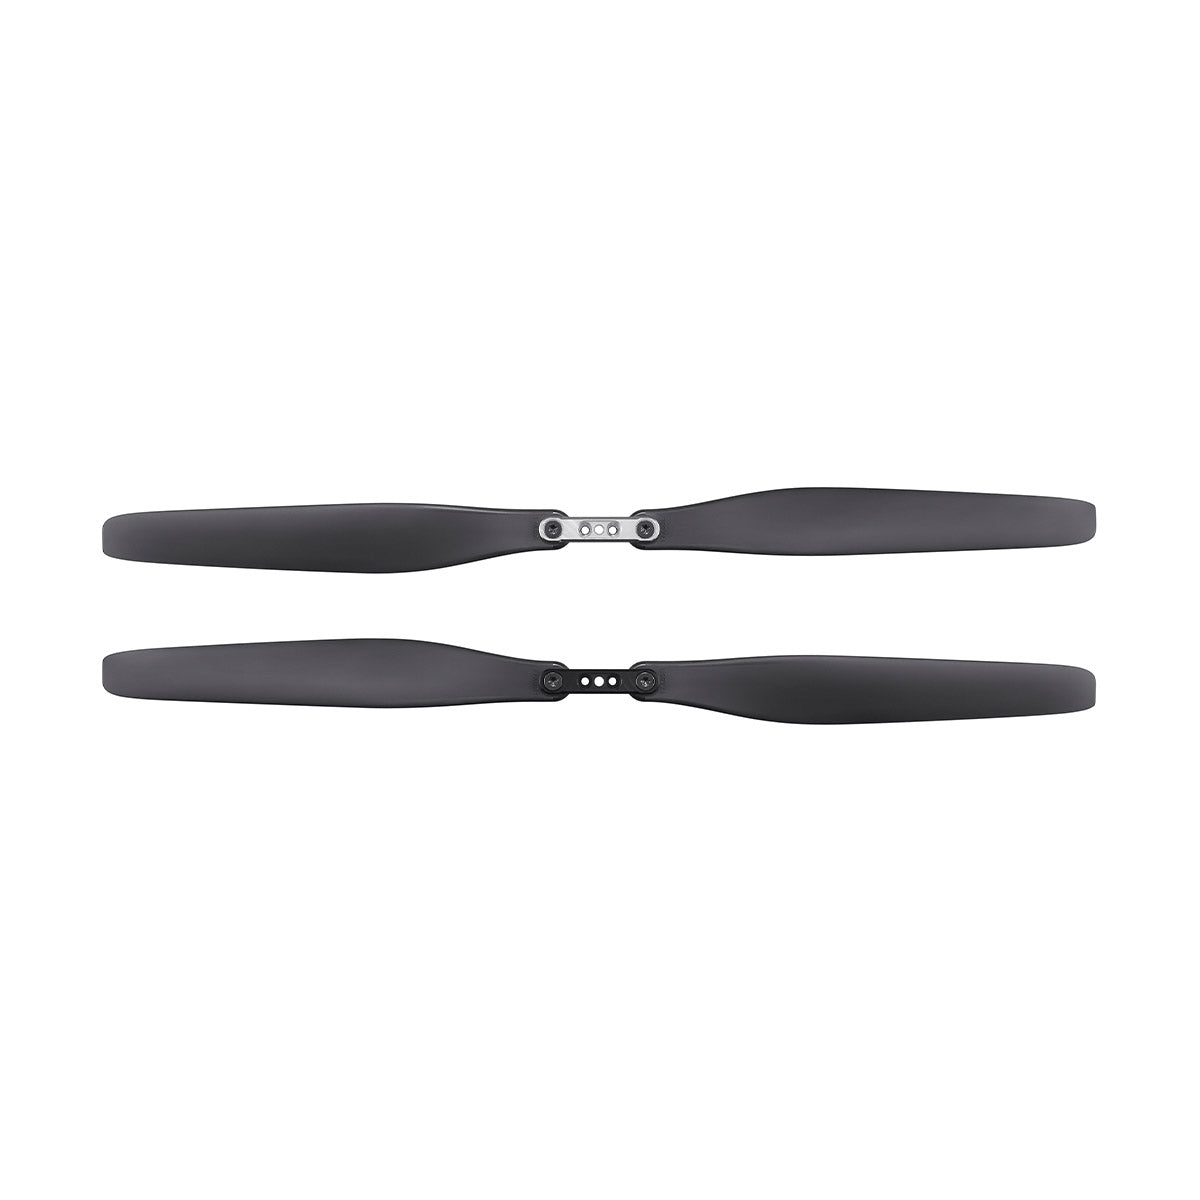 Sony Quick Release Propellers for Airpeak S1 Drone